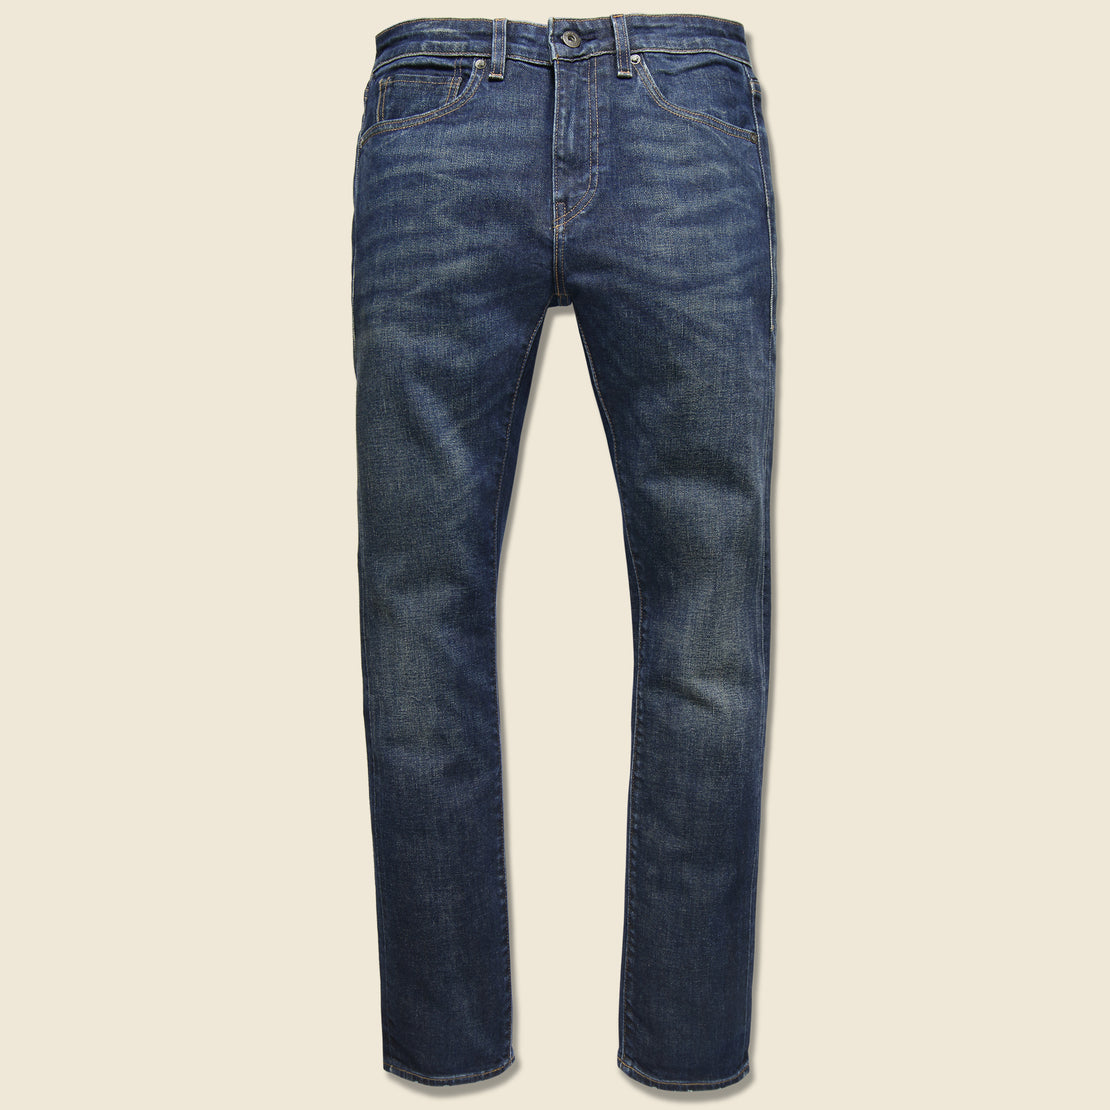 Levis Made & Crafted Tack Slim Jean - Cortez